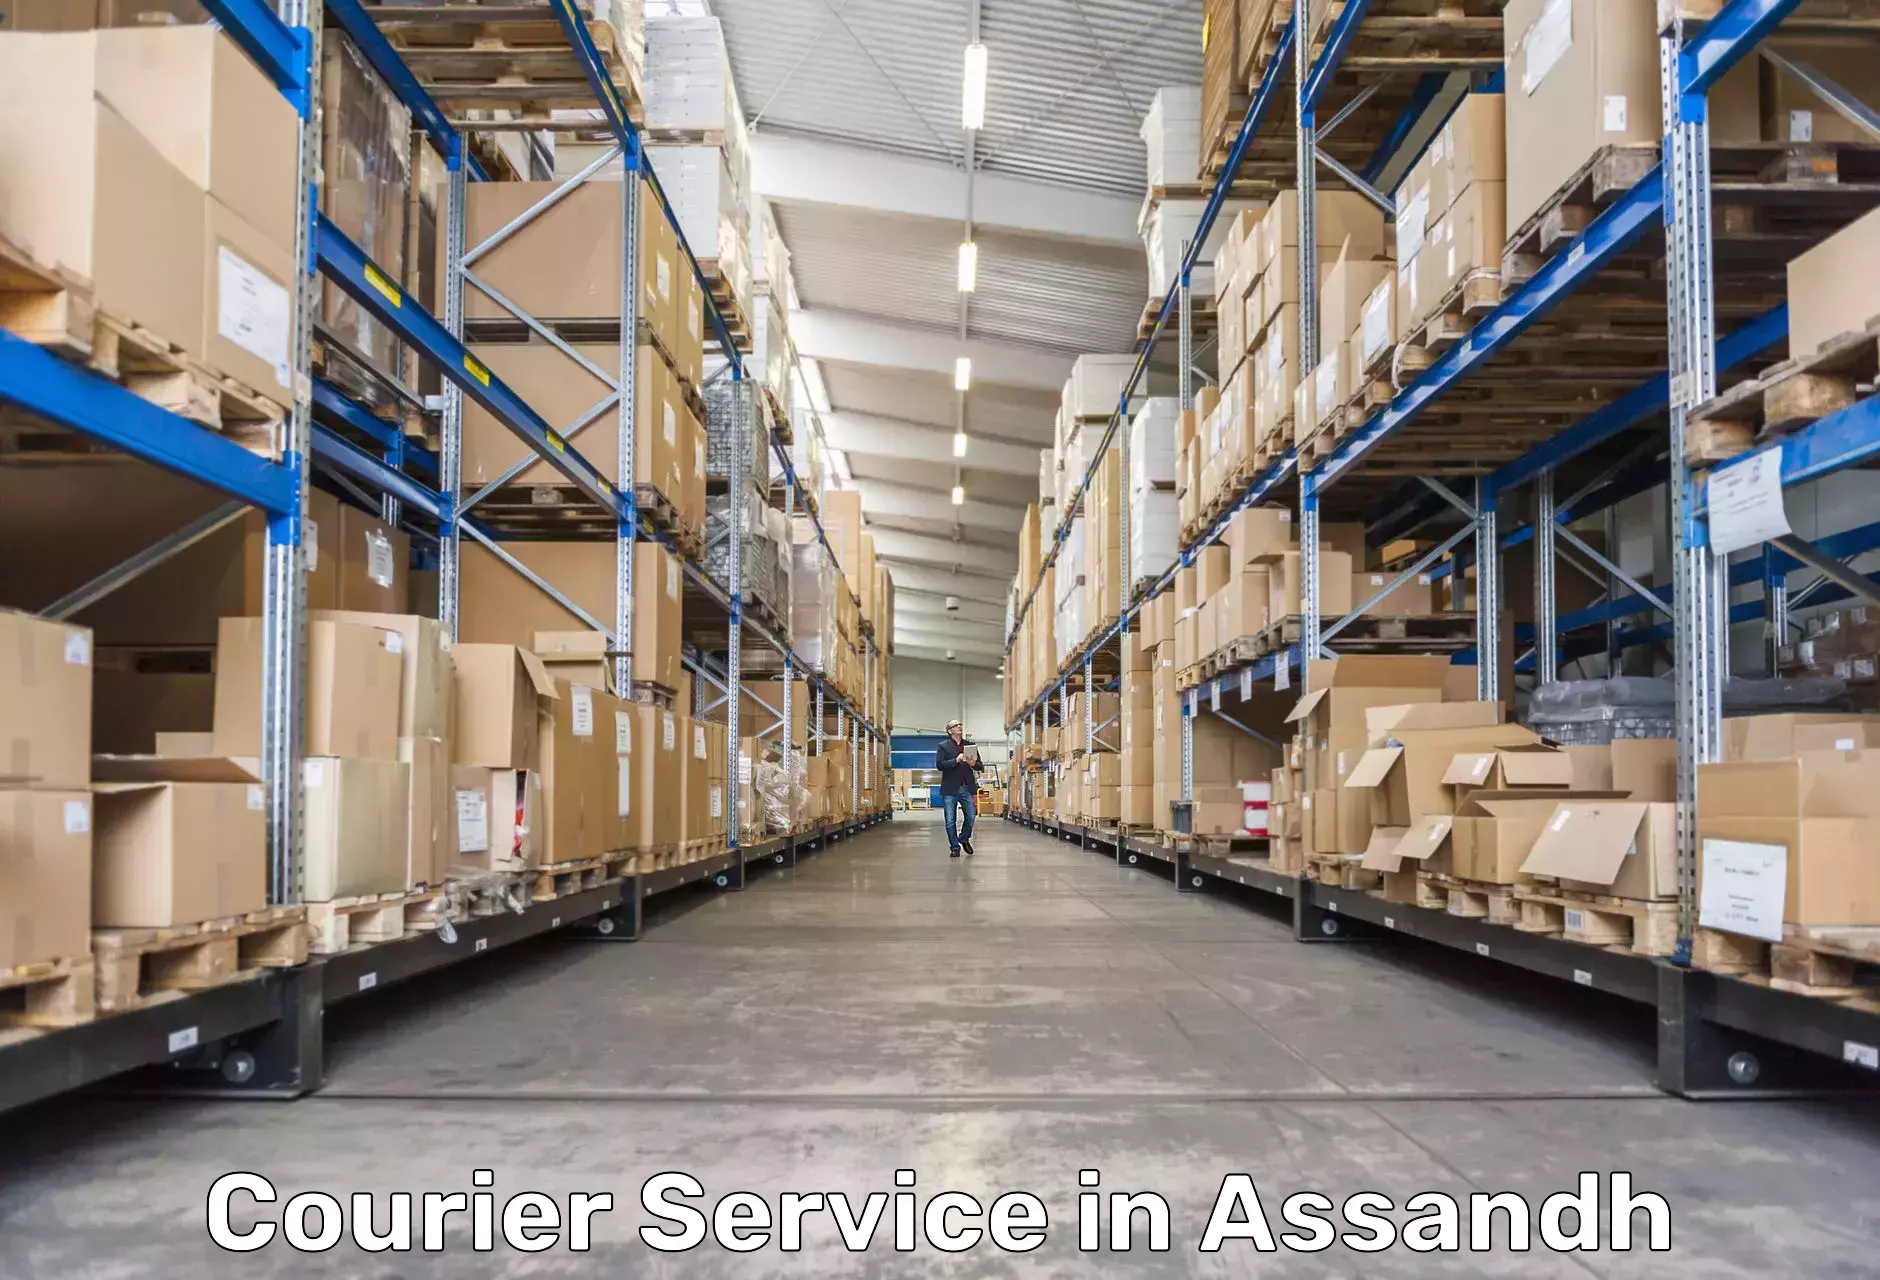 Courier service efficiency in Assandh